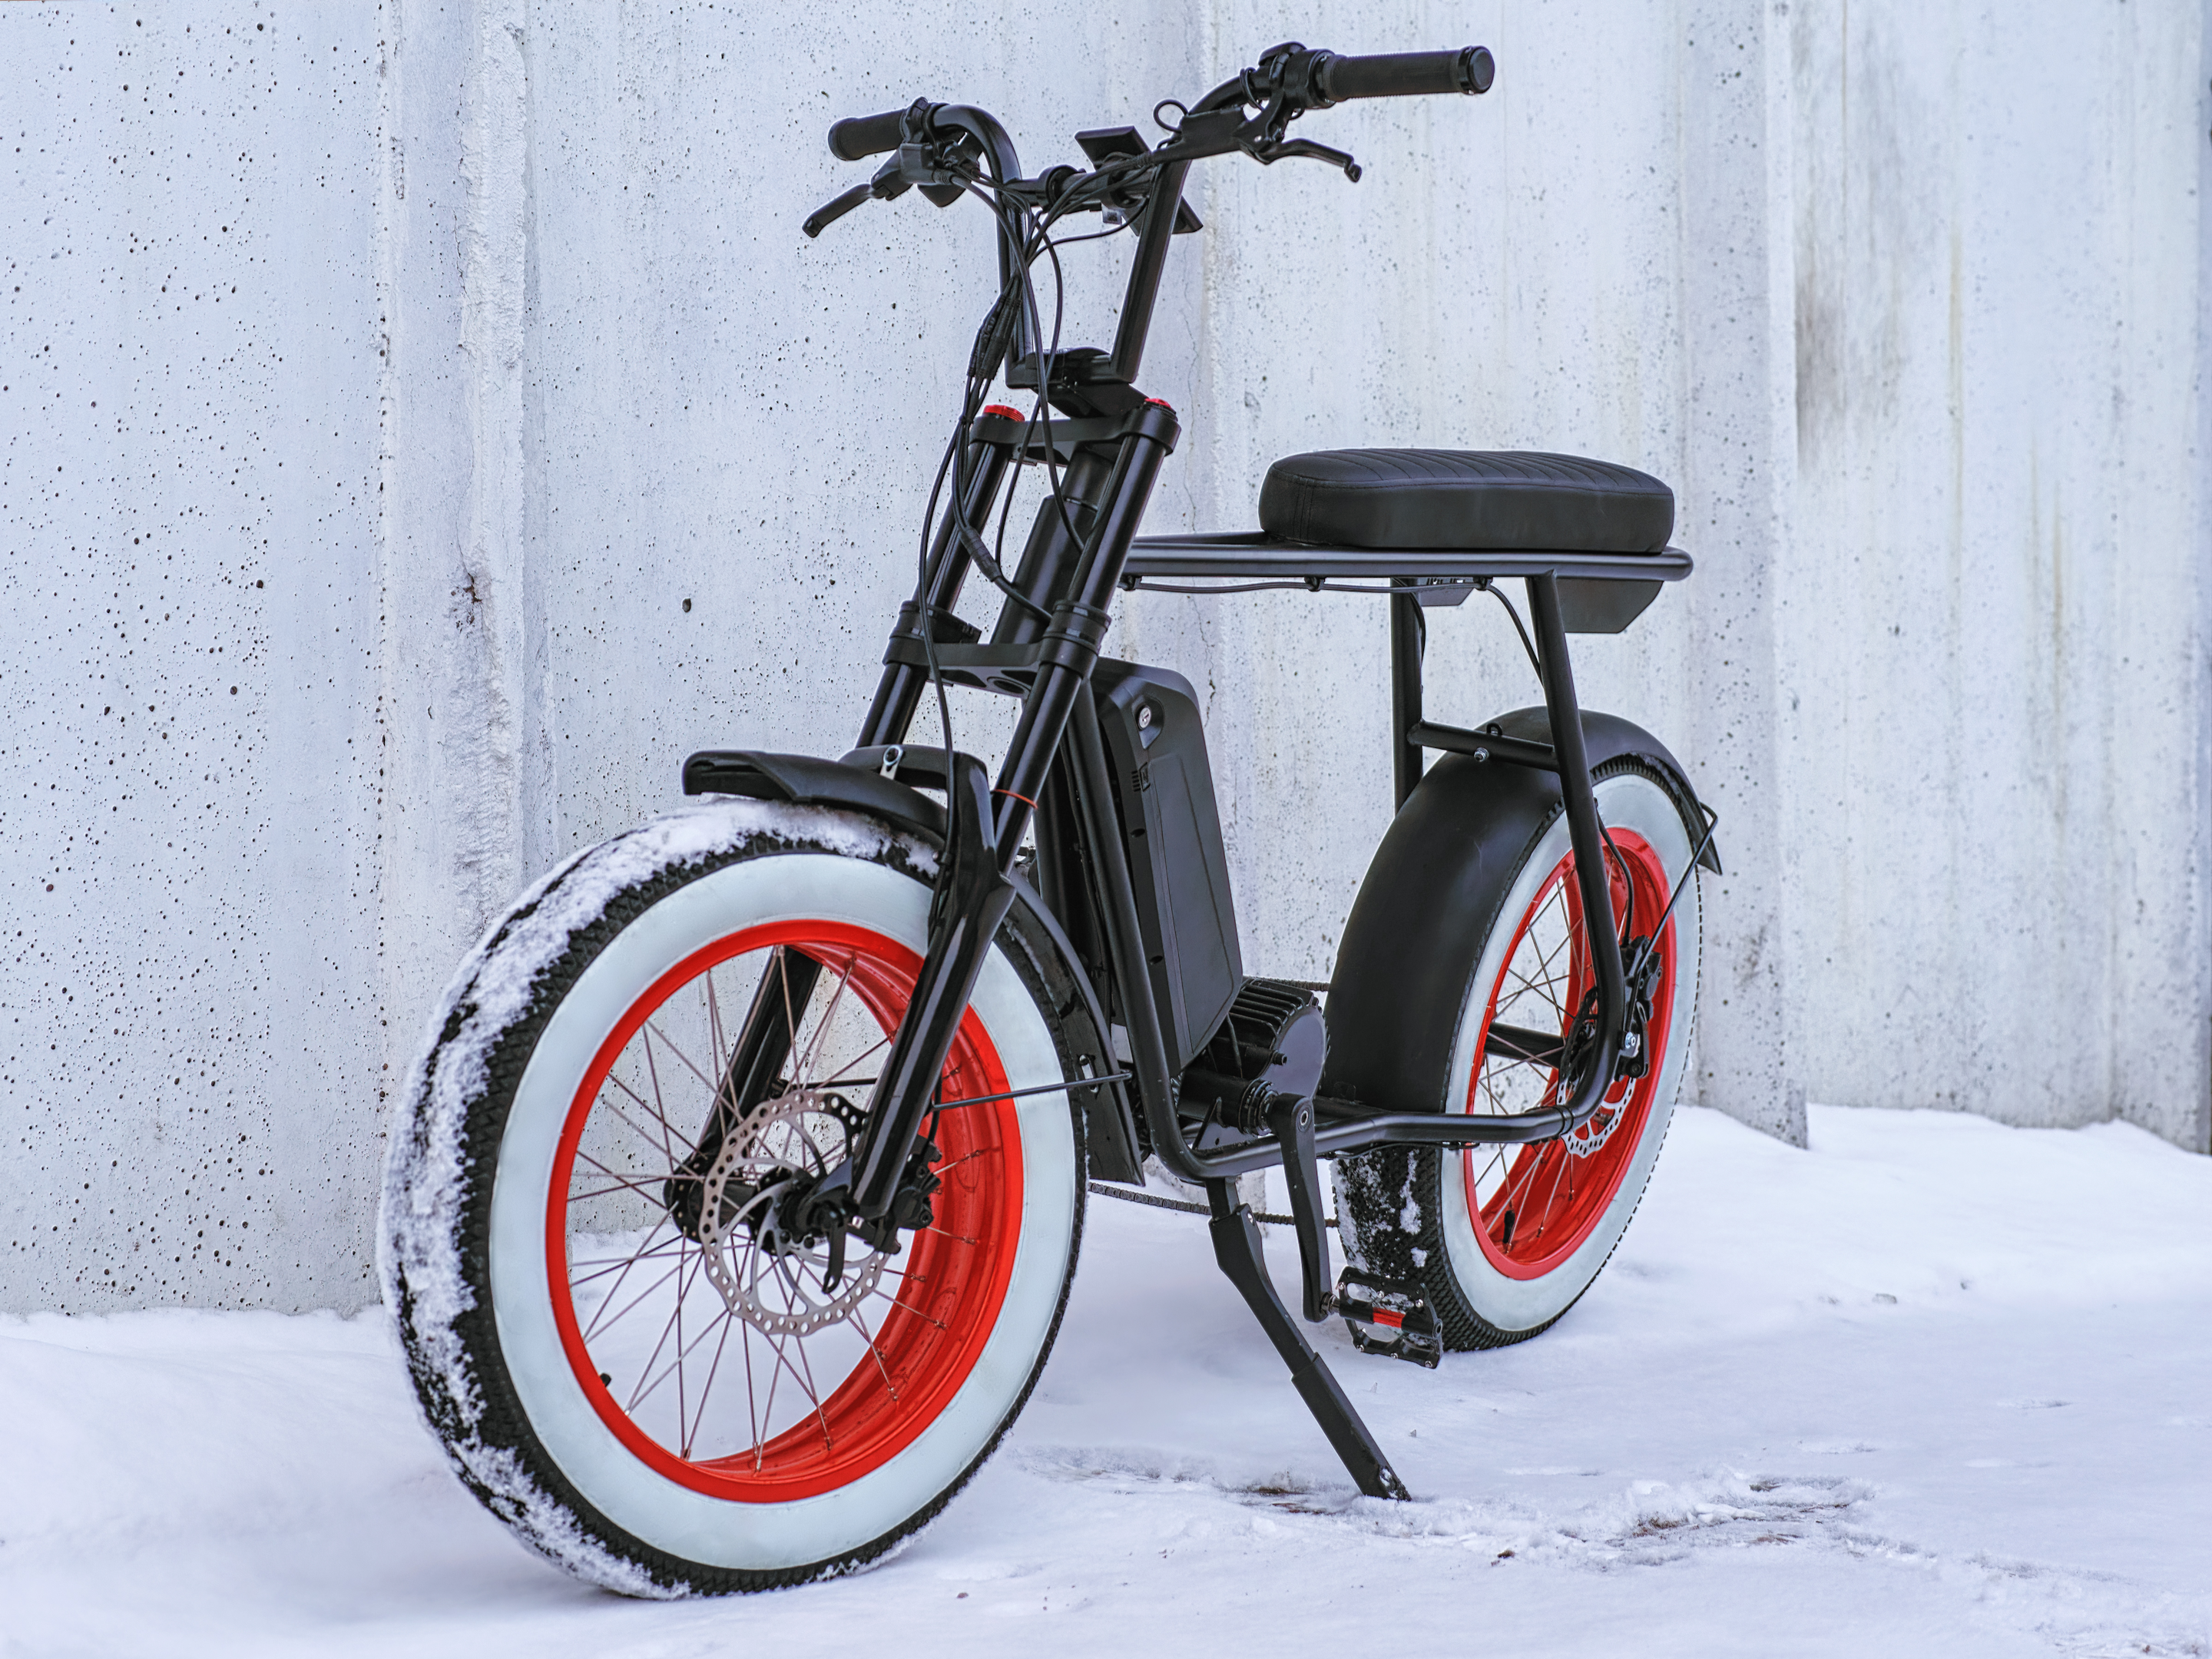 A fat wheel electric bike with front suspension forks